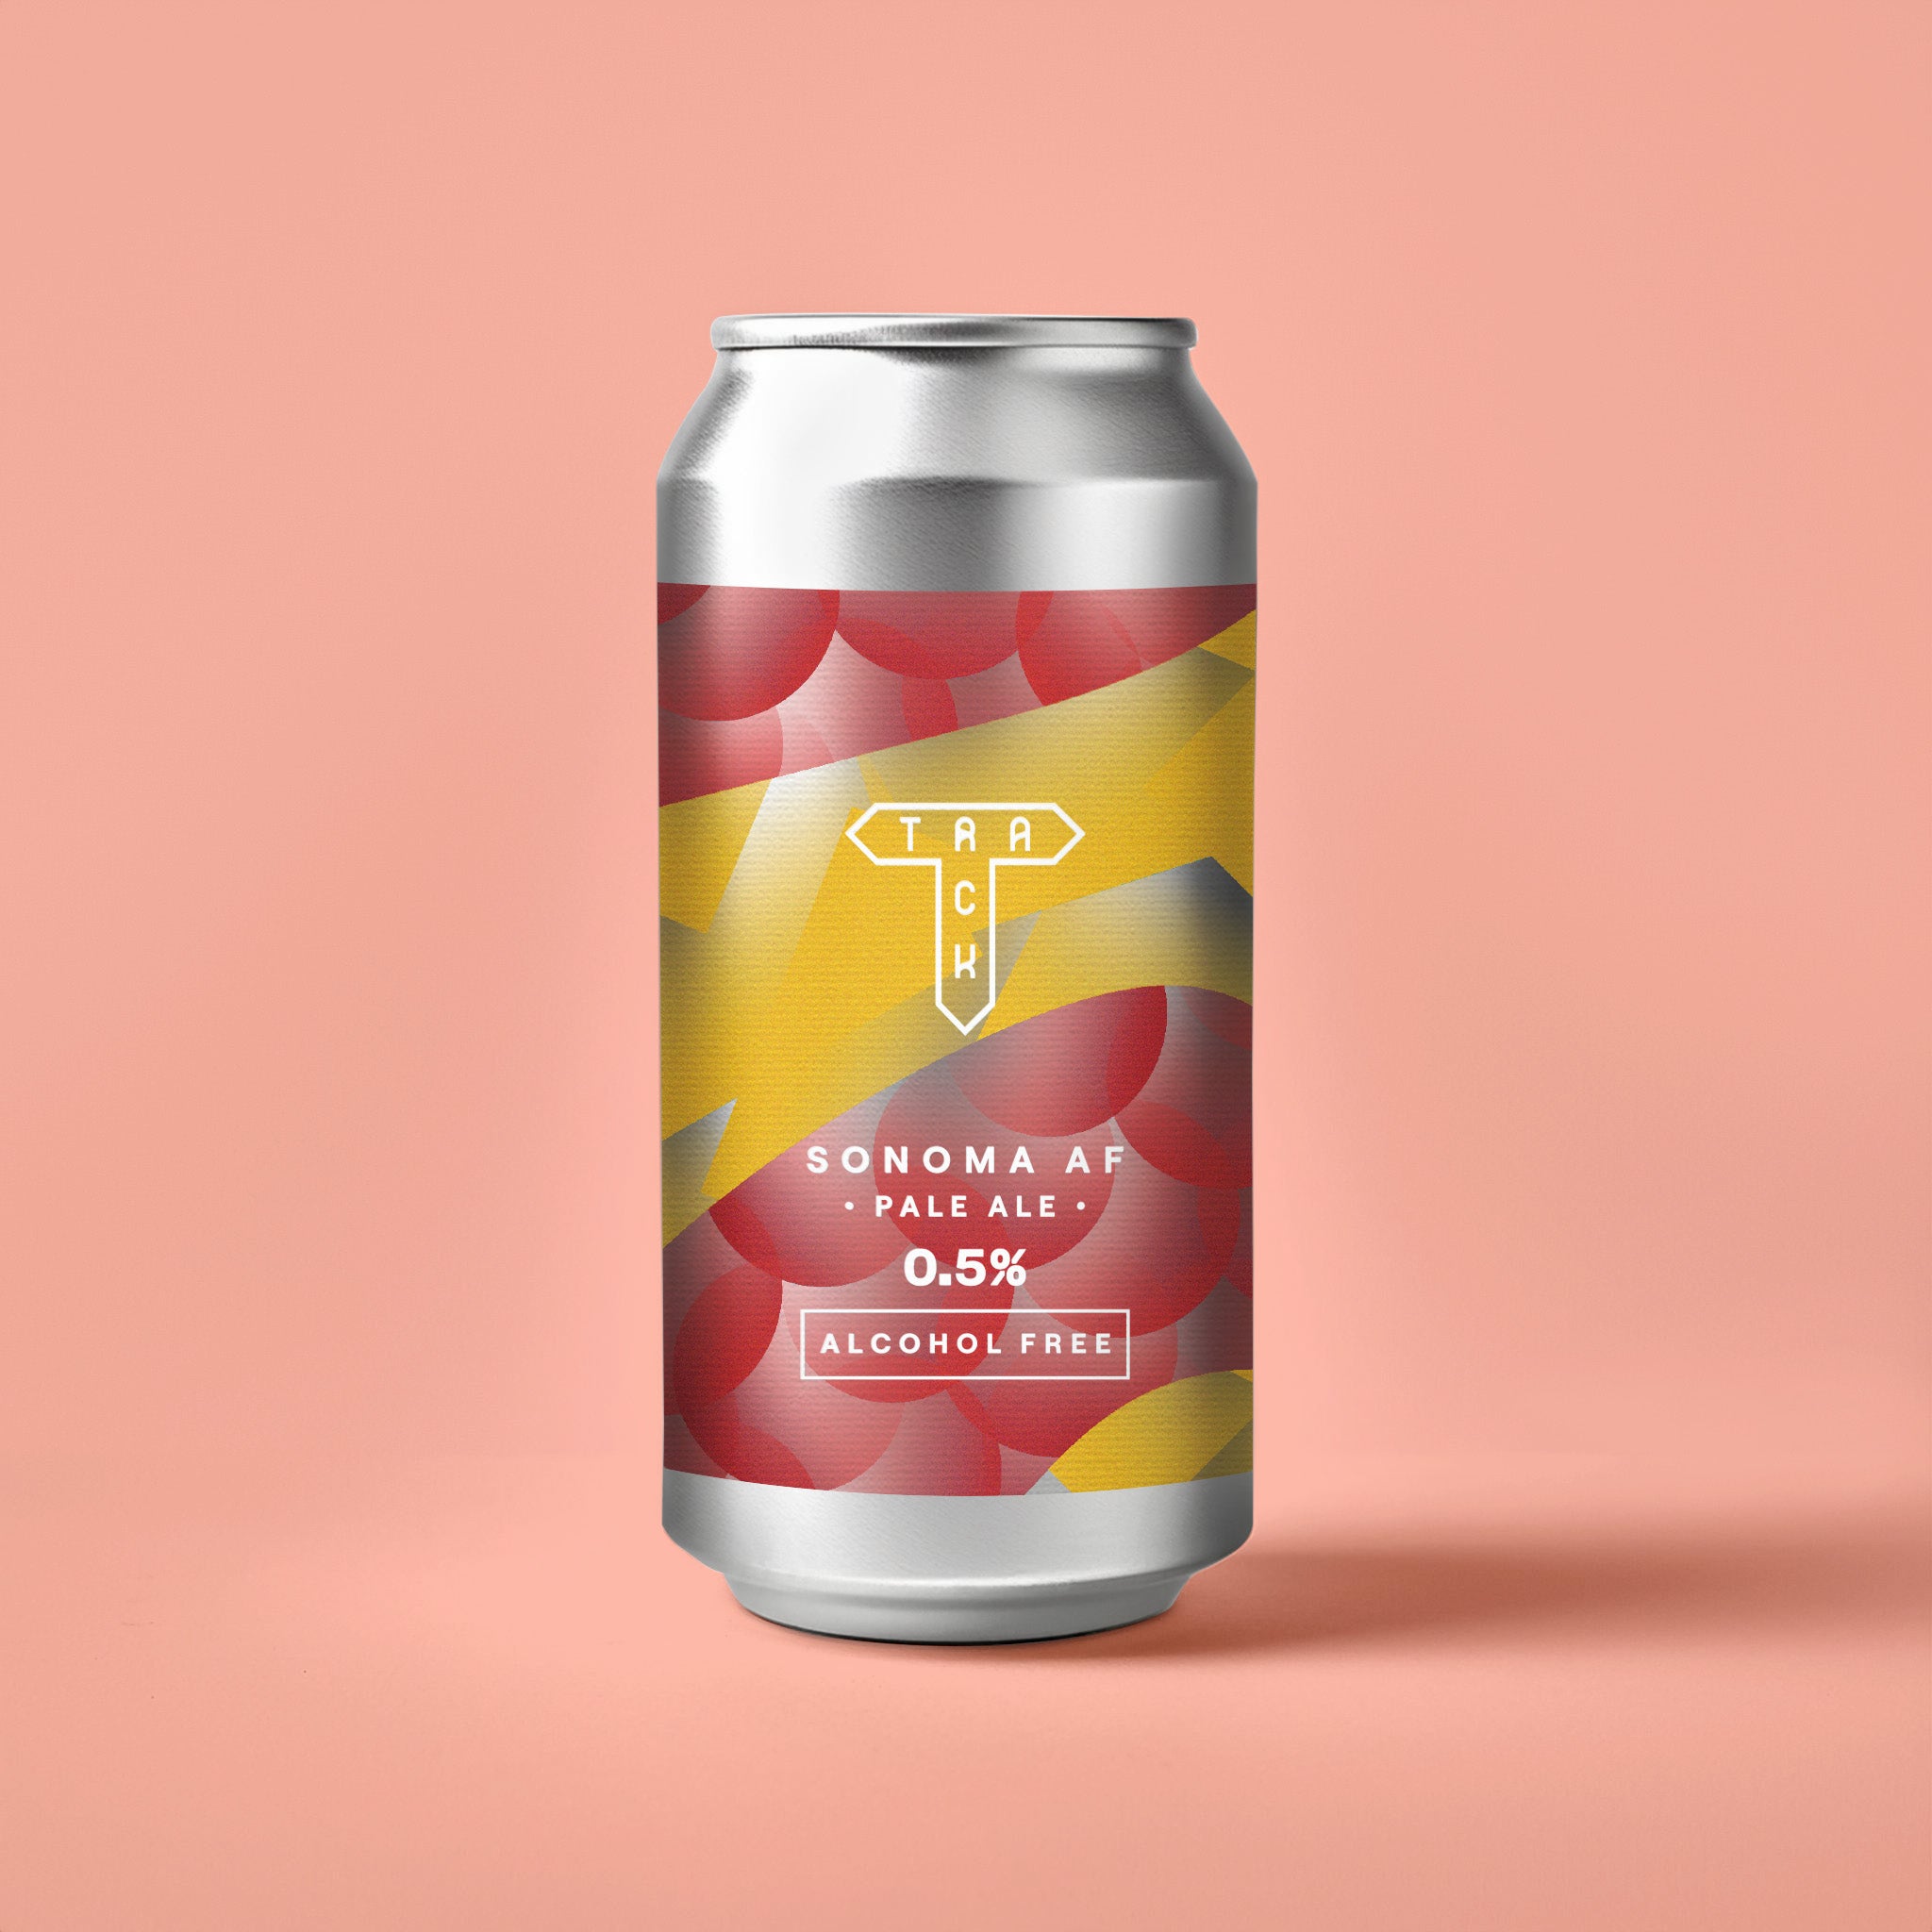 Sonoma AF | Alcohol Free Pale Ale | 0.5% - Track Brewing Company Limited